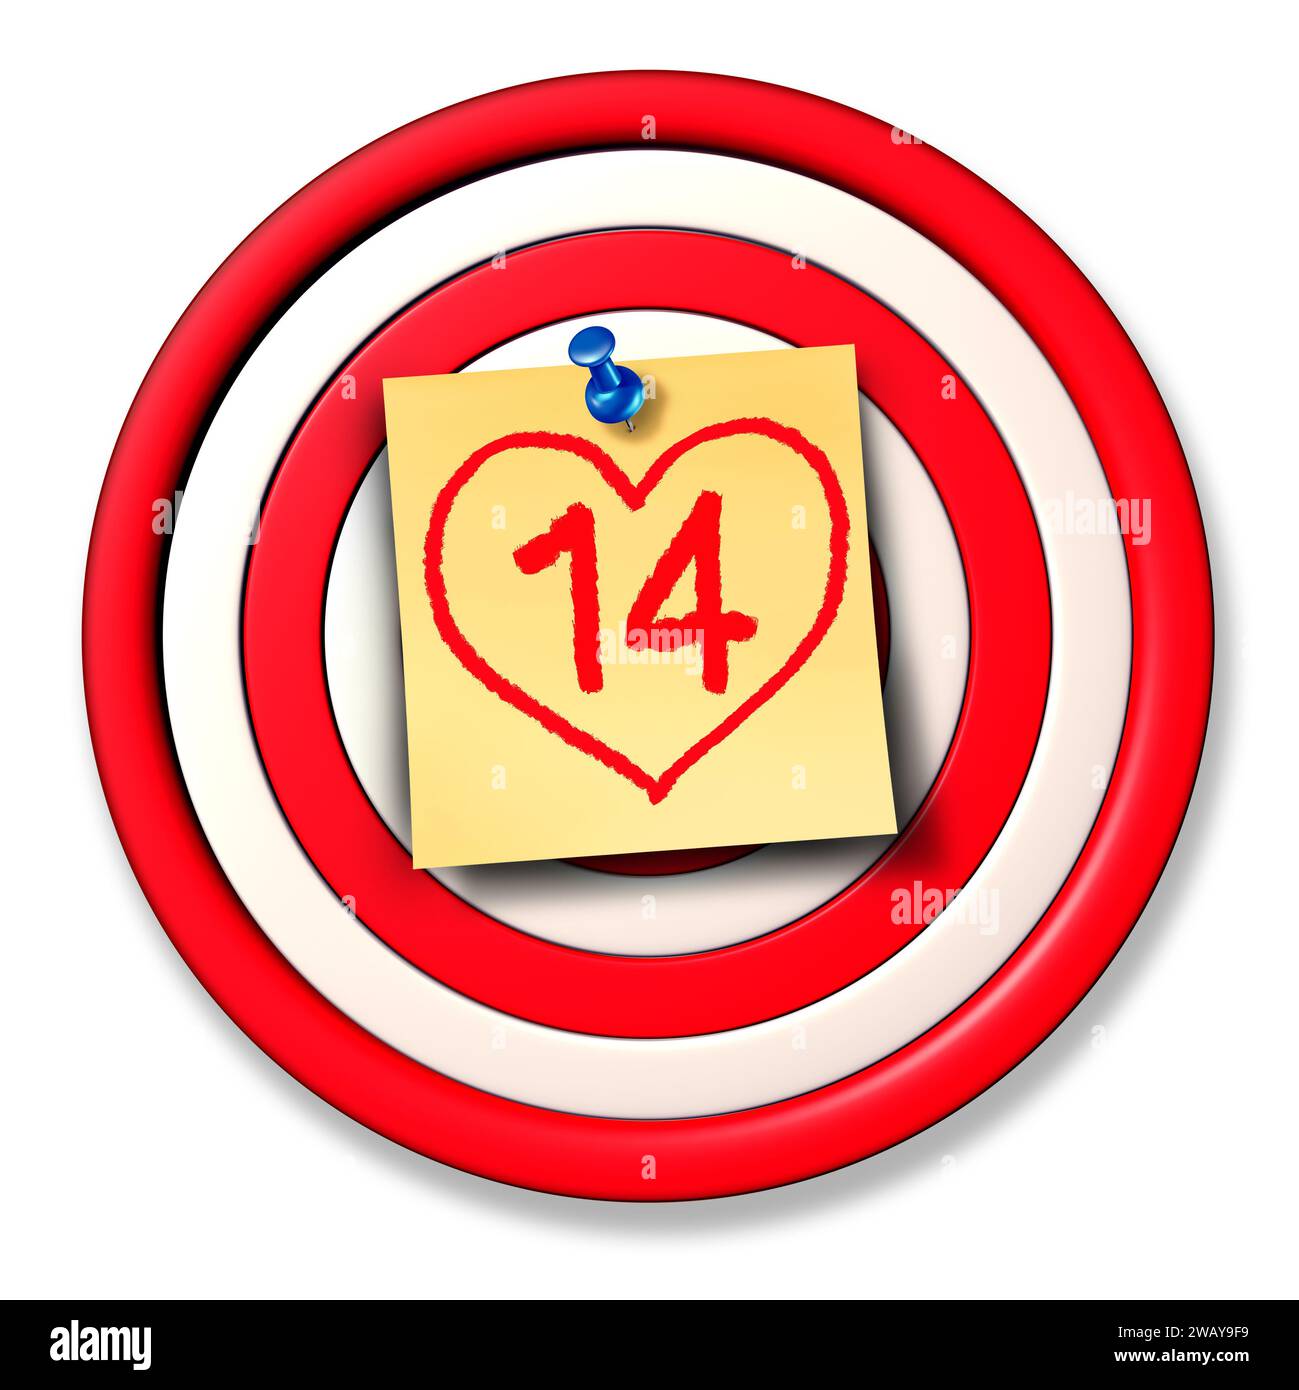 February 14 Valentines Day Holiday target date  as a Valentine date night plan as a reminder of a Love celebration to celebrate relationships Stock Photo